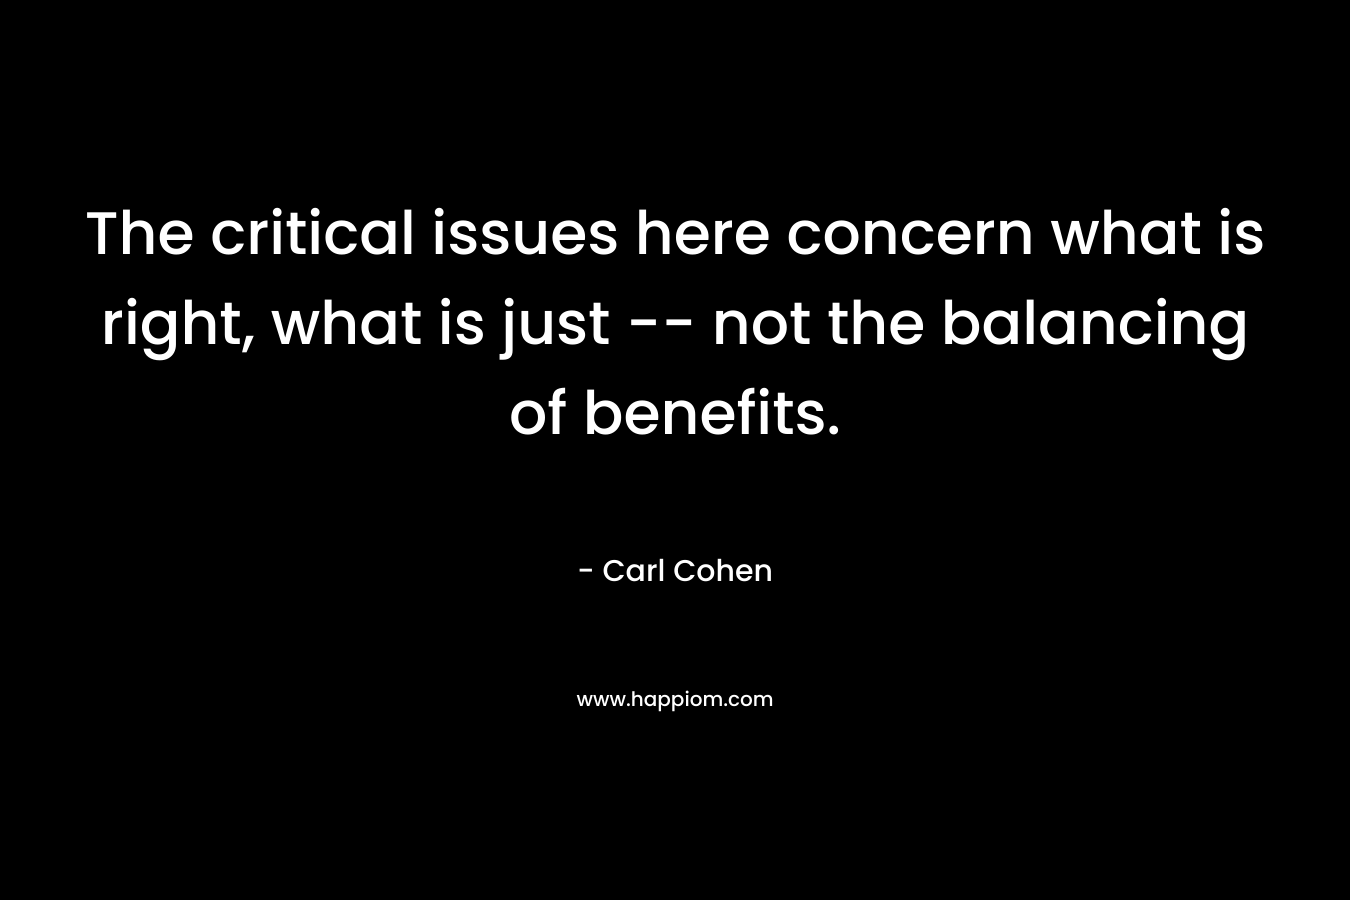 The critical issues here concern what is right, what is just — not the balancing of benefits. – Carl Cohen